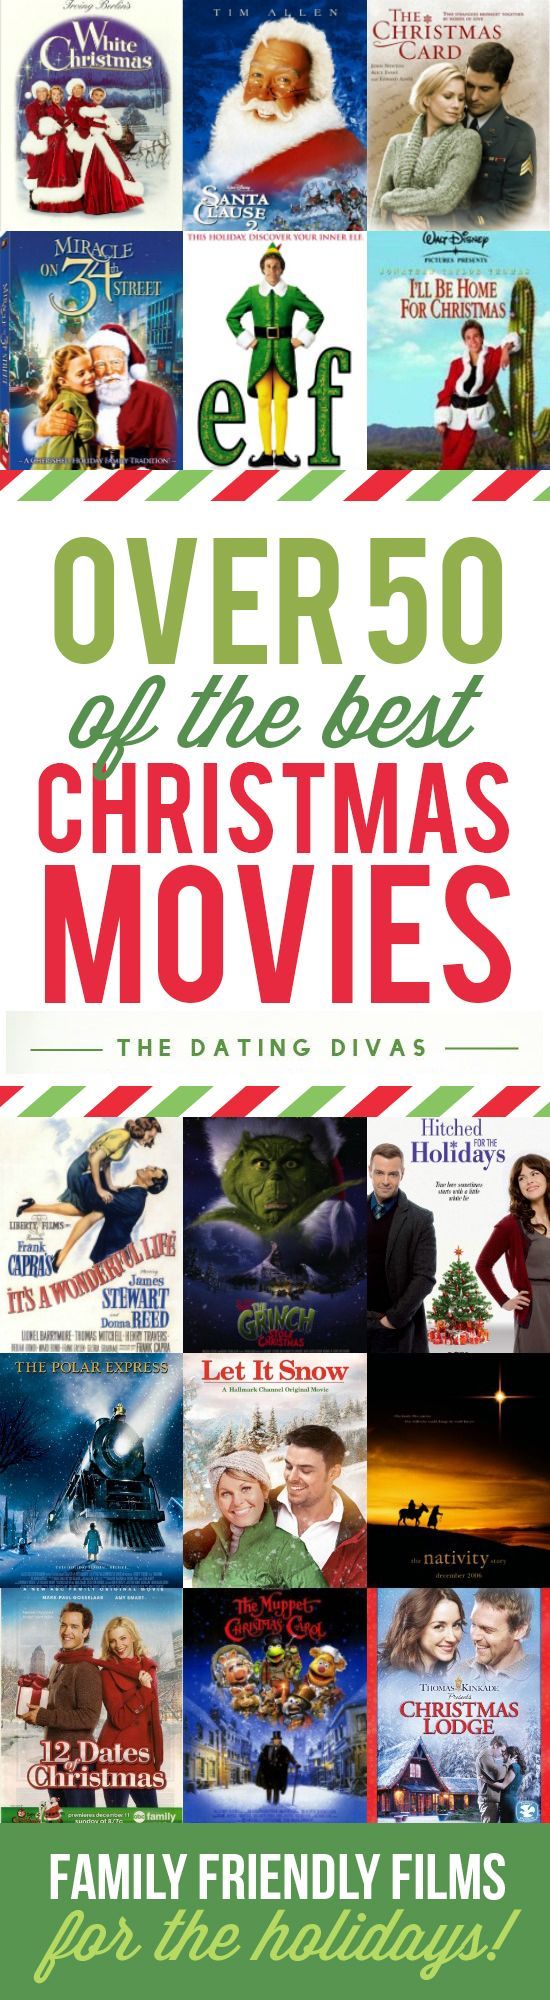 50 of the best Christmas movies all in one place! These are family-friendly films